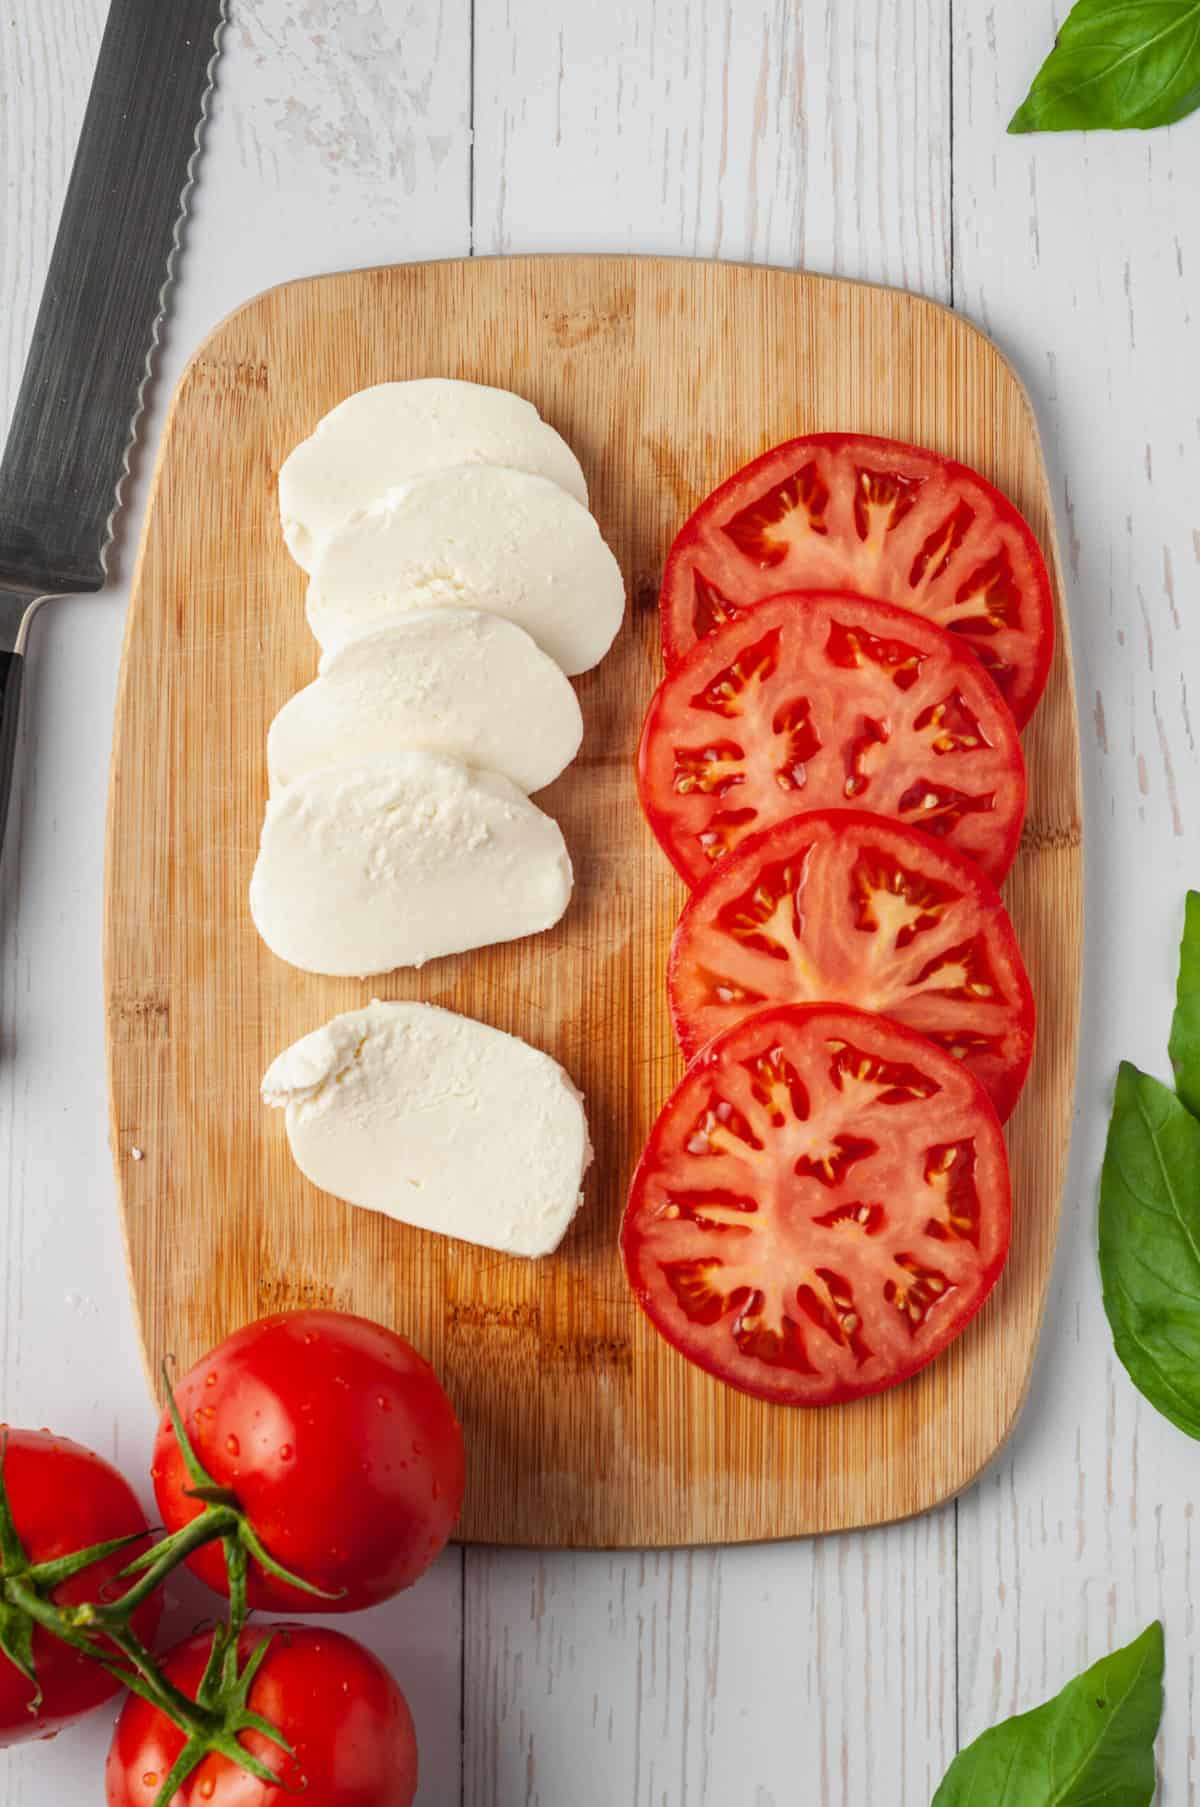 Slices of fresh mozzarella and tomatoes on cutting board